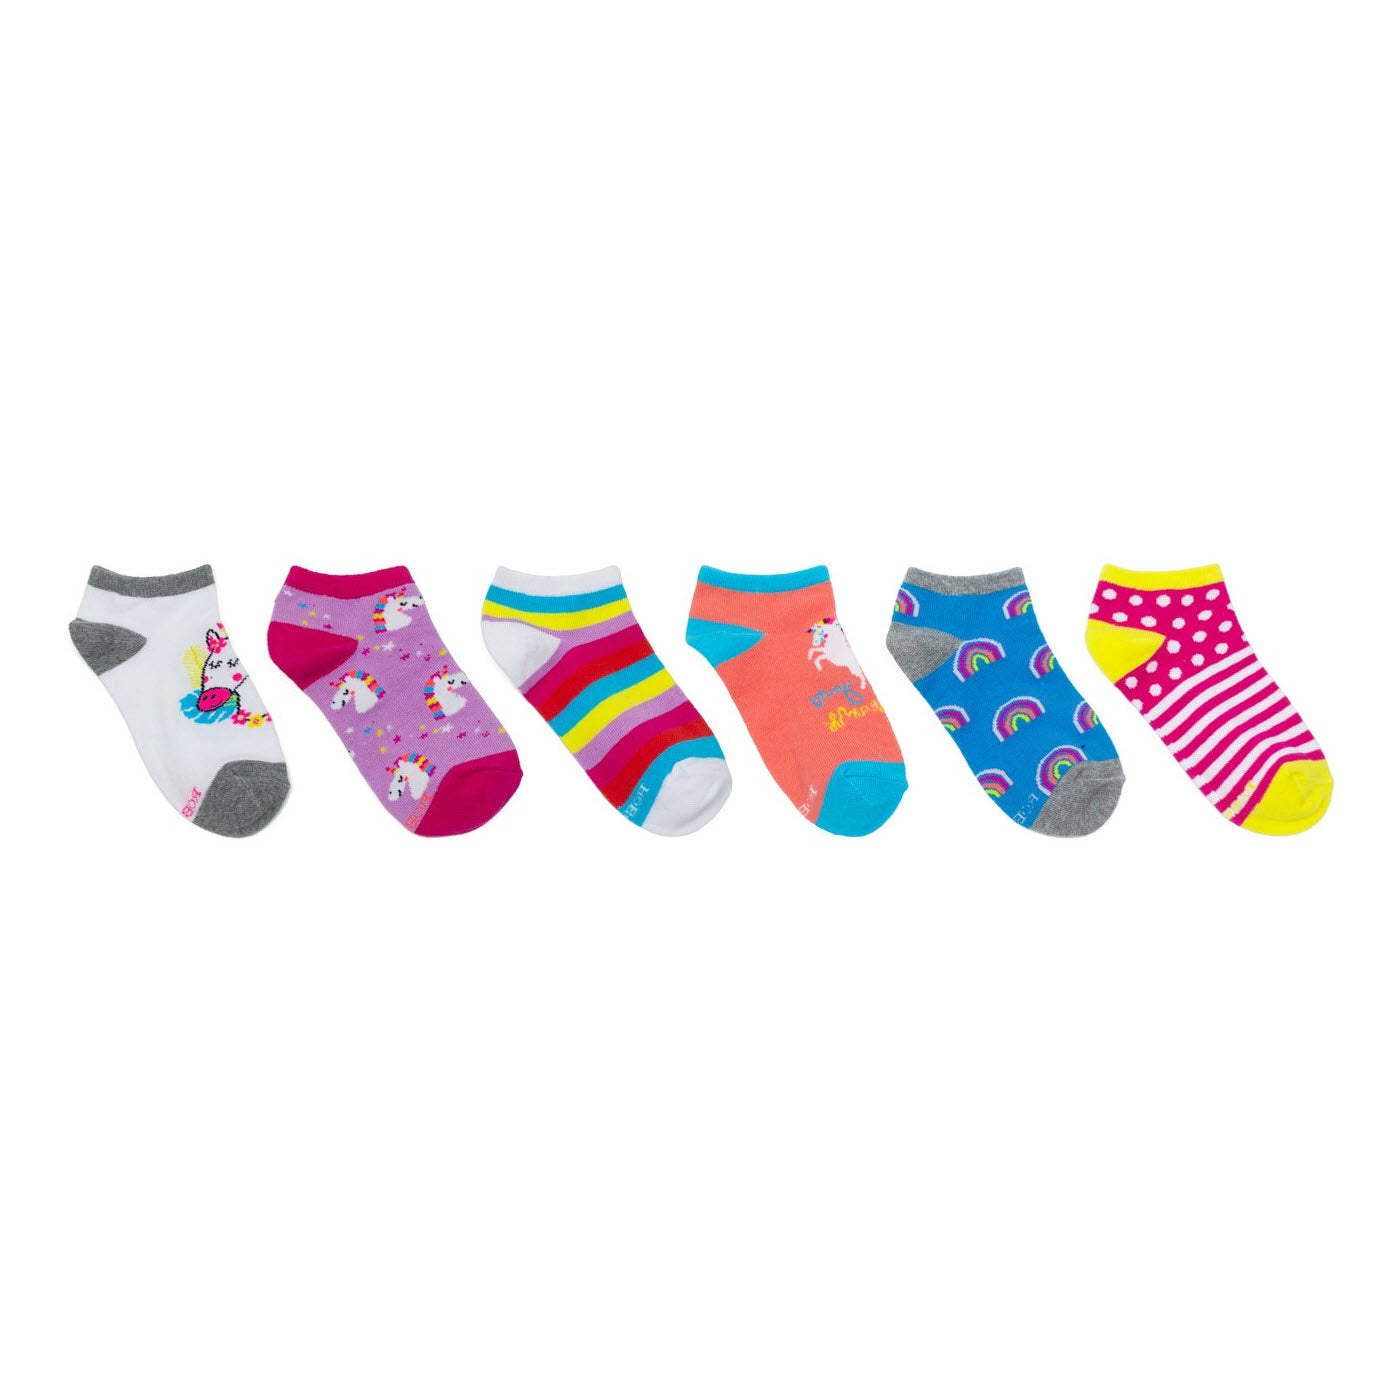 Six pairs of colorful children's socks with various patterns, including stripes, polka dots, Robeez No Show 6pk Girls Unicorn pattern, and cartoon motifs, displayed in a row on a white background.